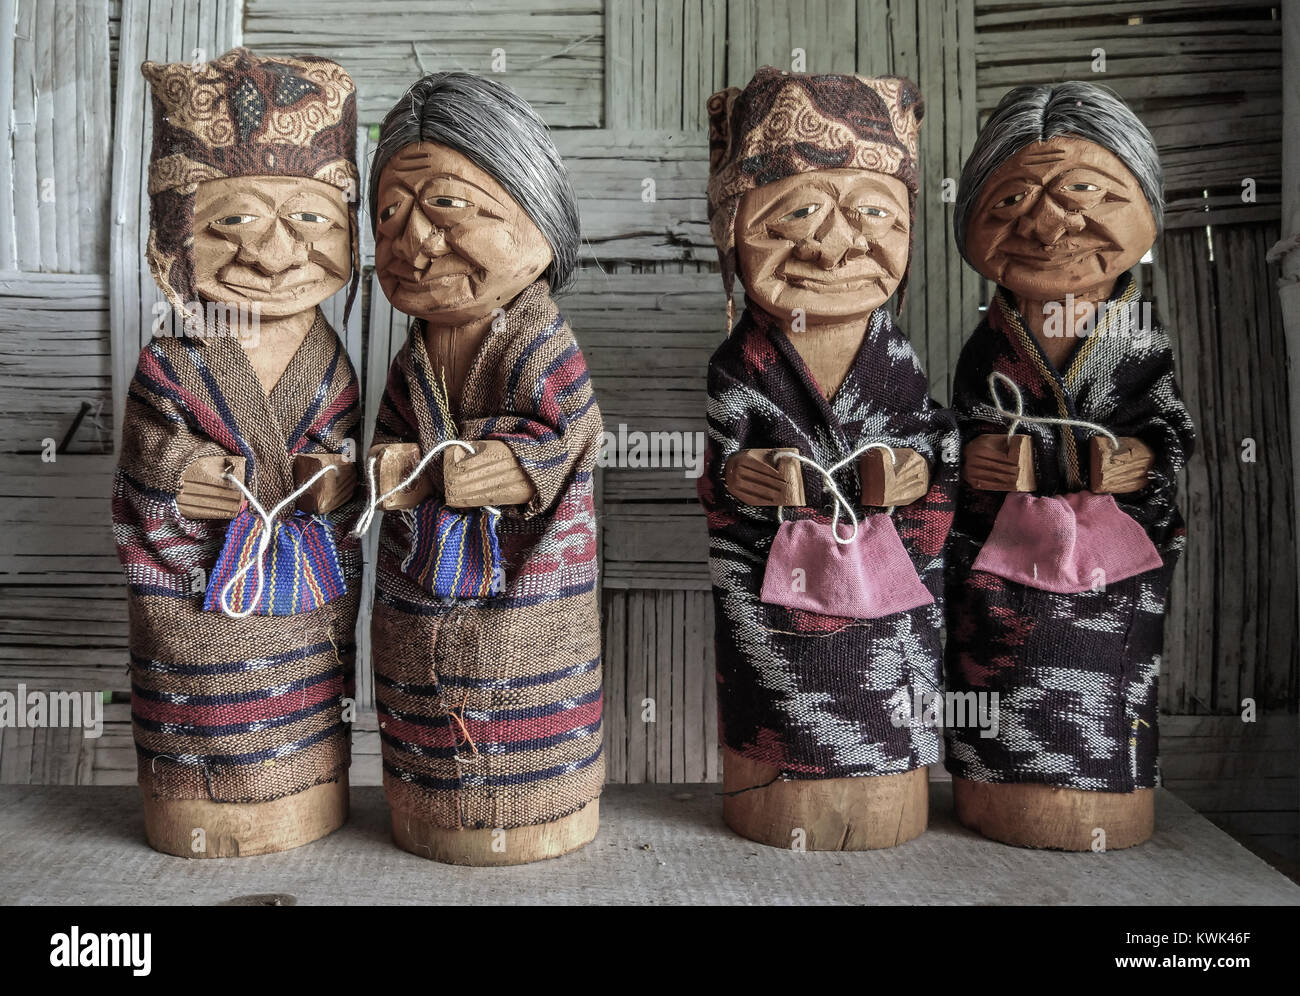 Tau Tau Statue. Tau Tau are a type of effigy / statue made of wood or bamboo. They are particular to the Toraja ethnic group in South Sulawesi. Stock Photo